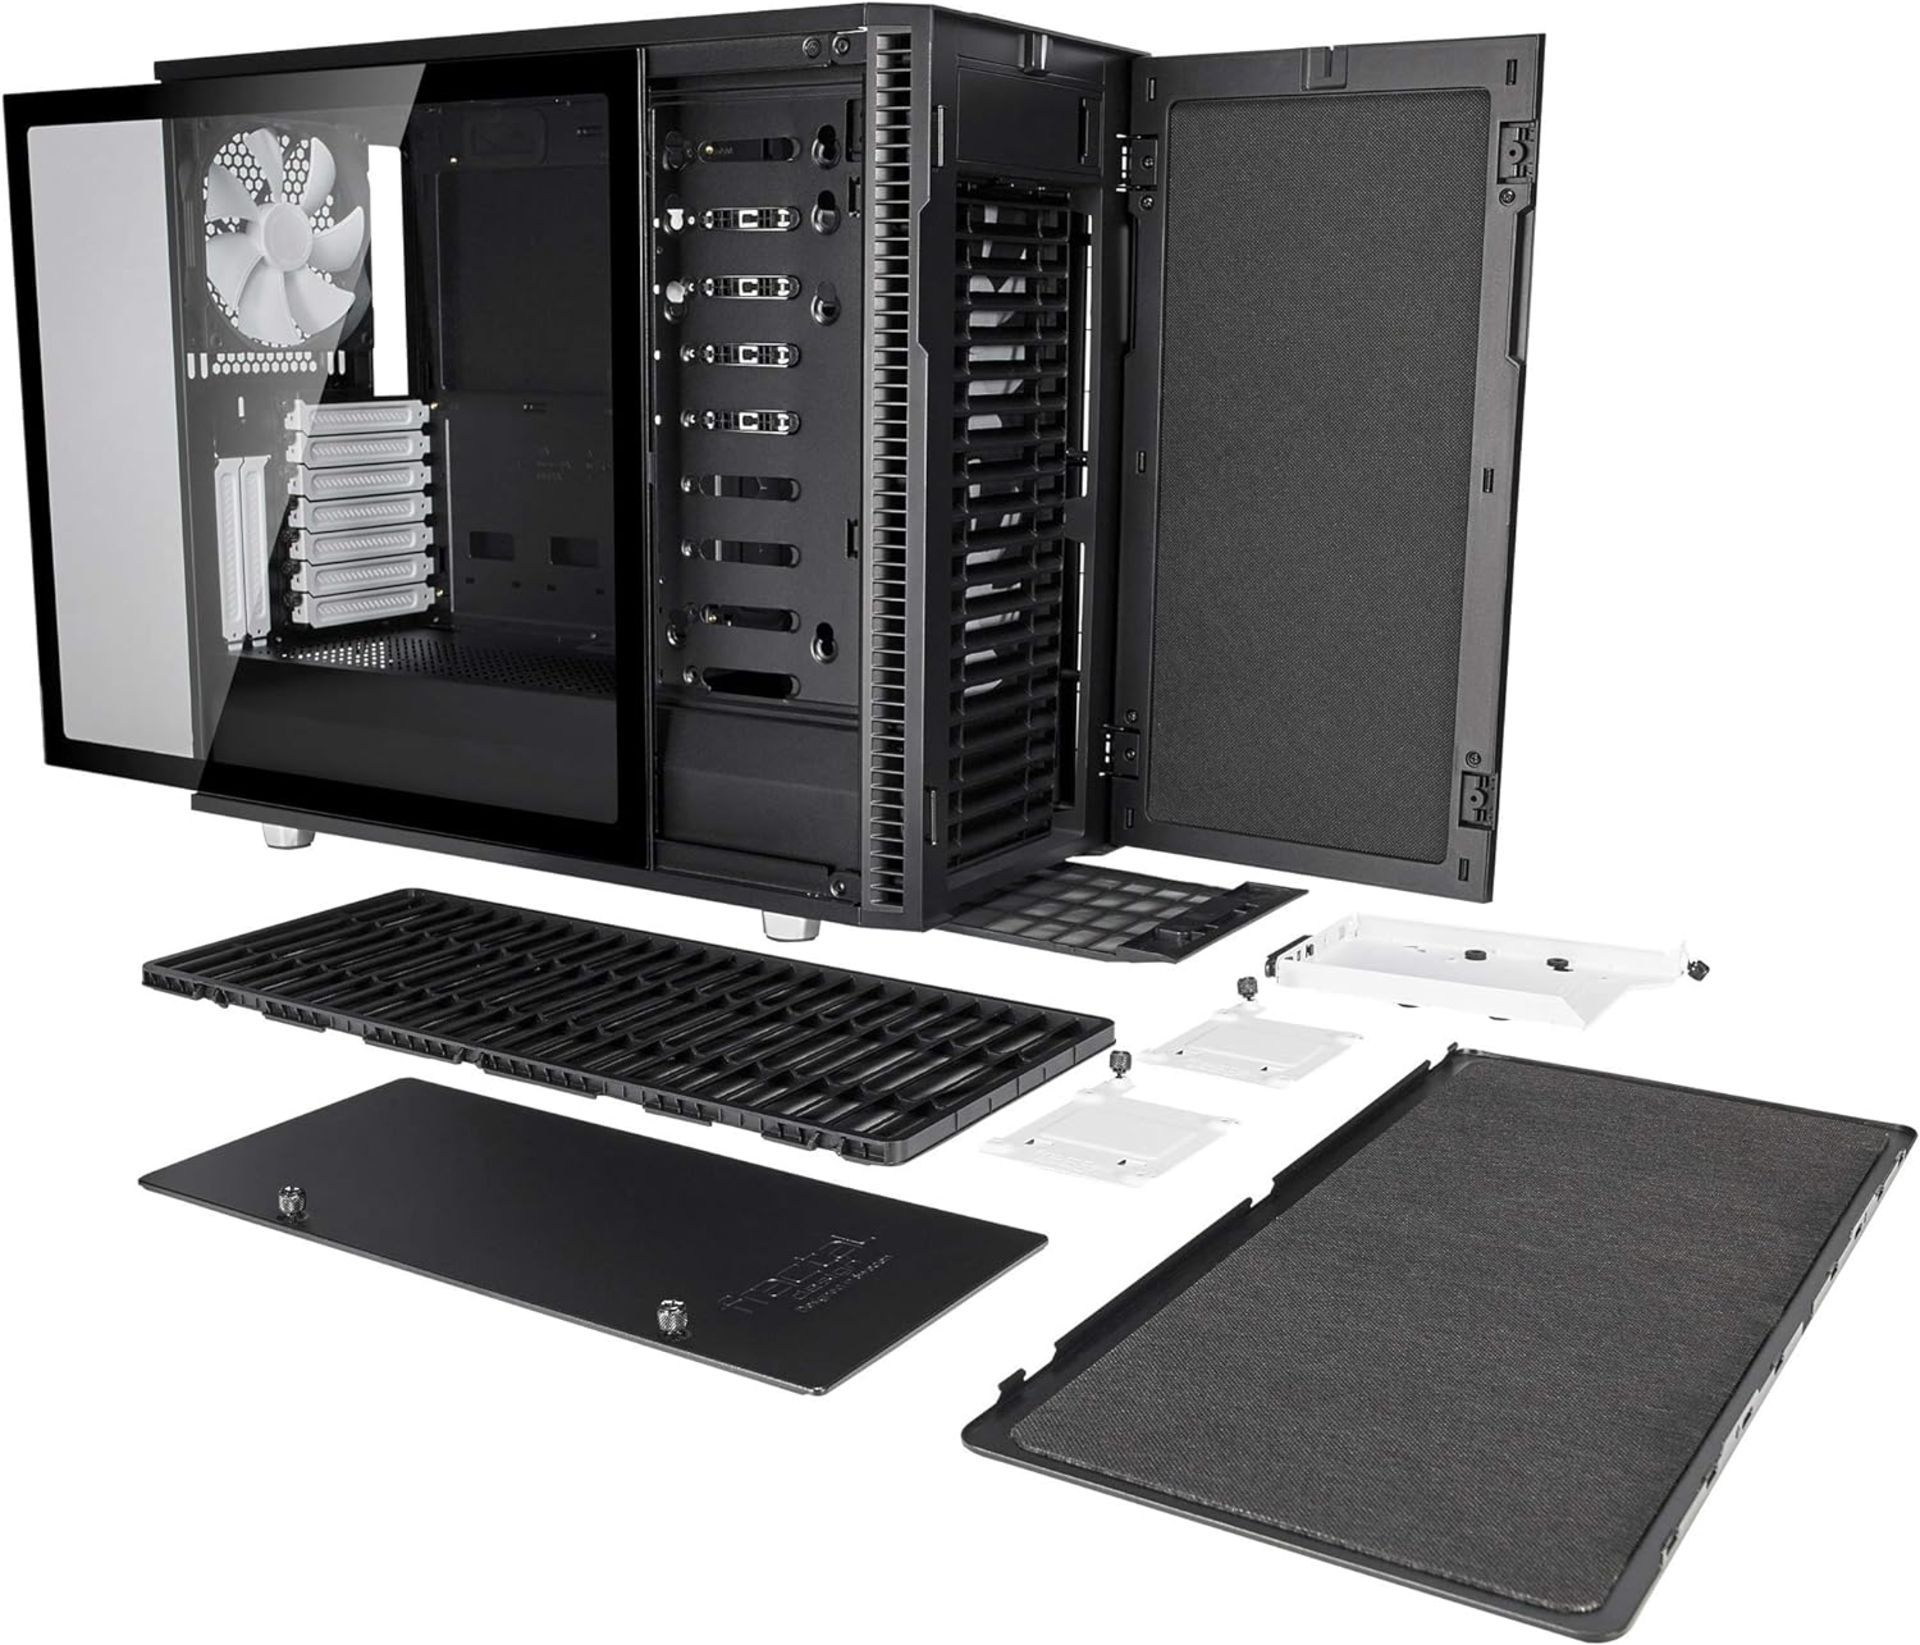 NEW & BOXED FRACTAL DESIGN Define R6 Mid Tower ATX Computer Case- BLACK. RRP £161.94. (R6-7). - Image 7 of 8